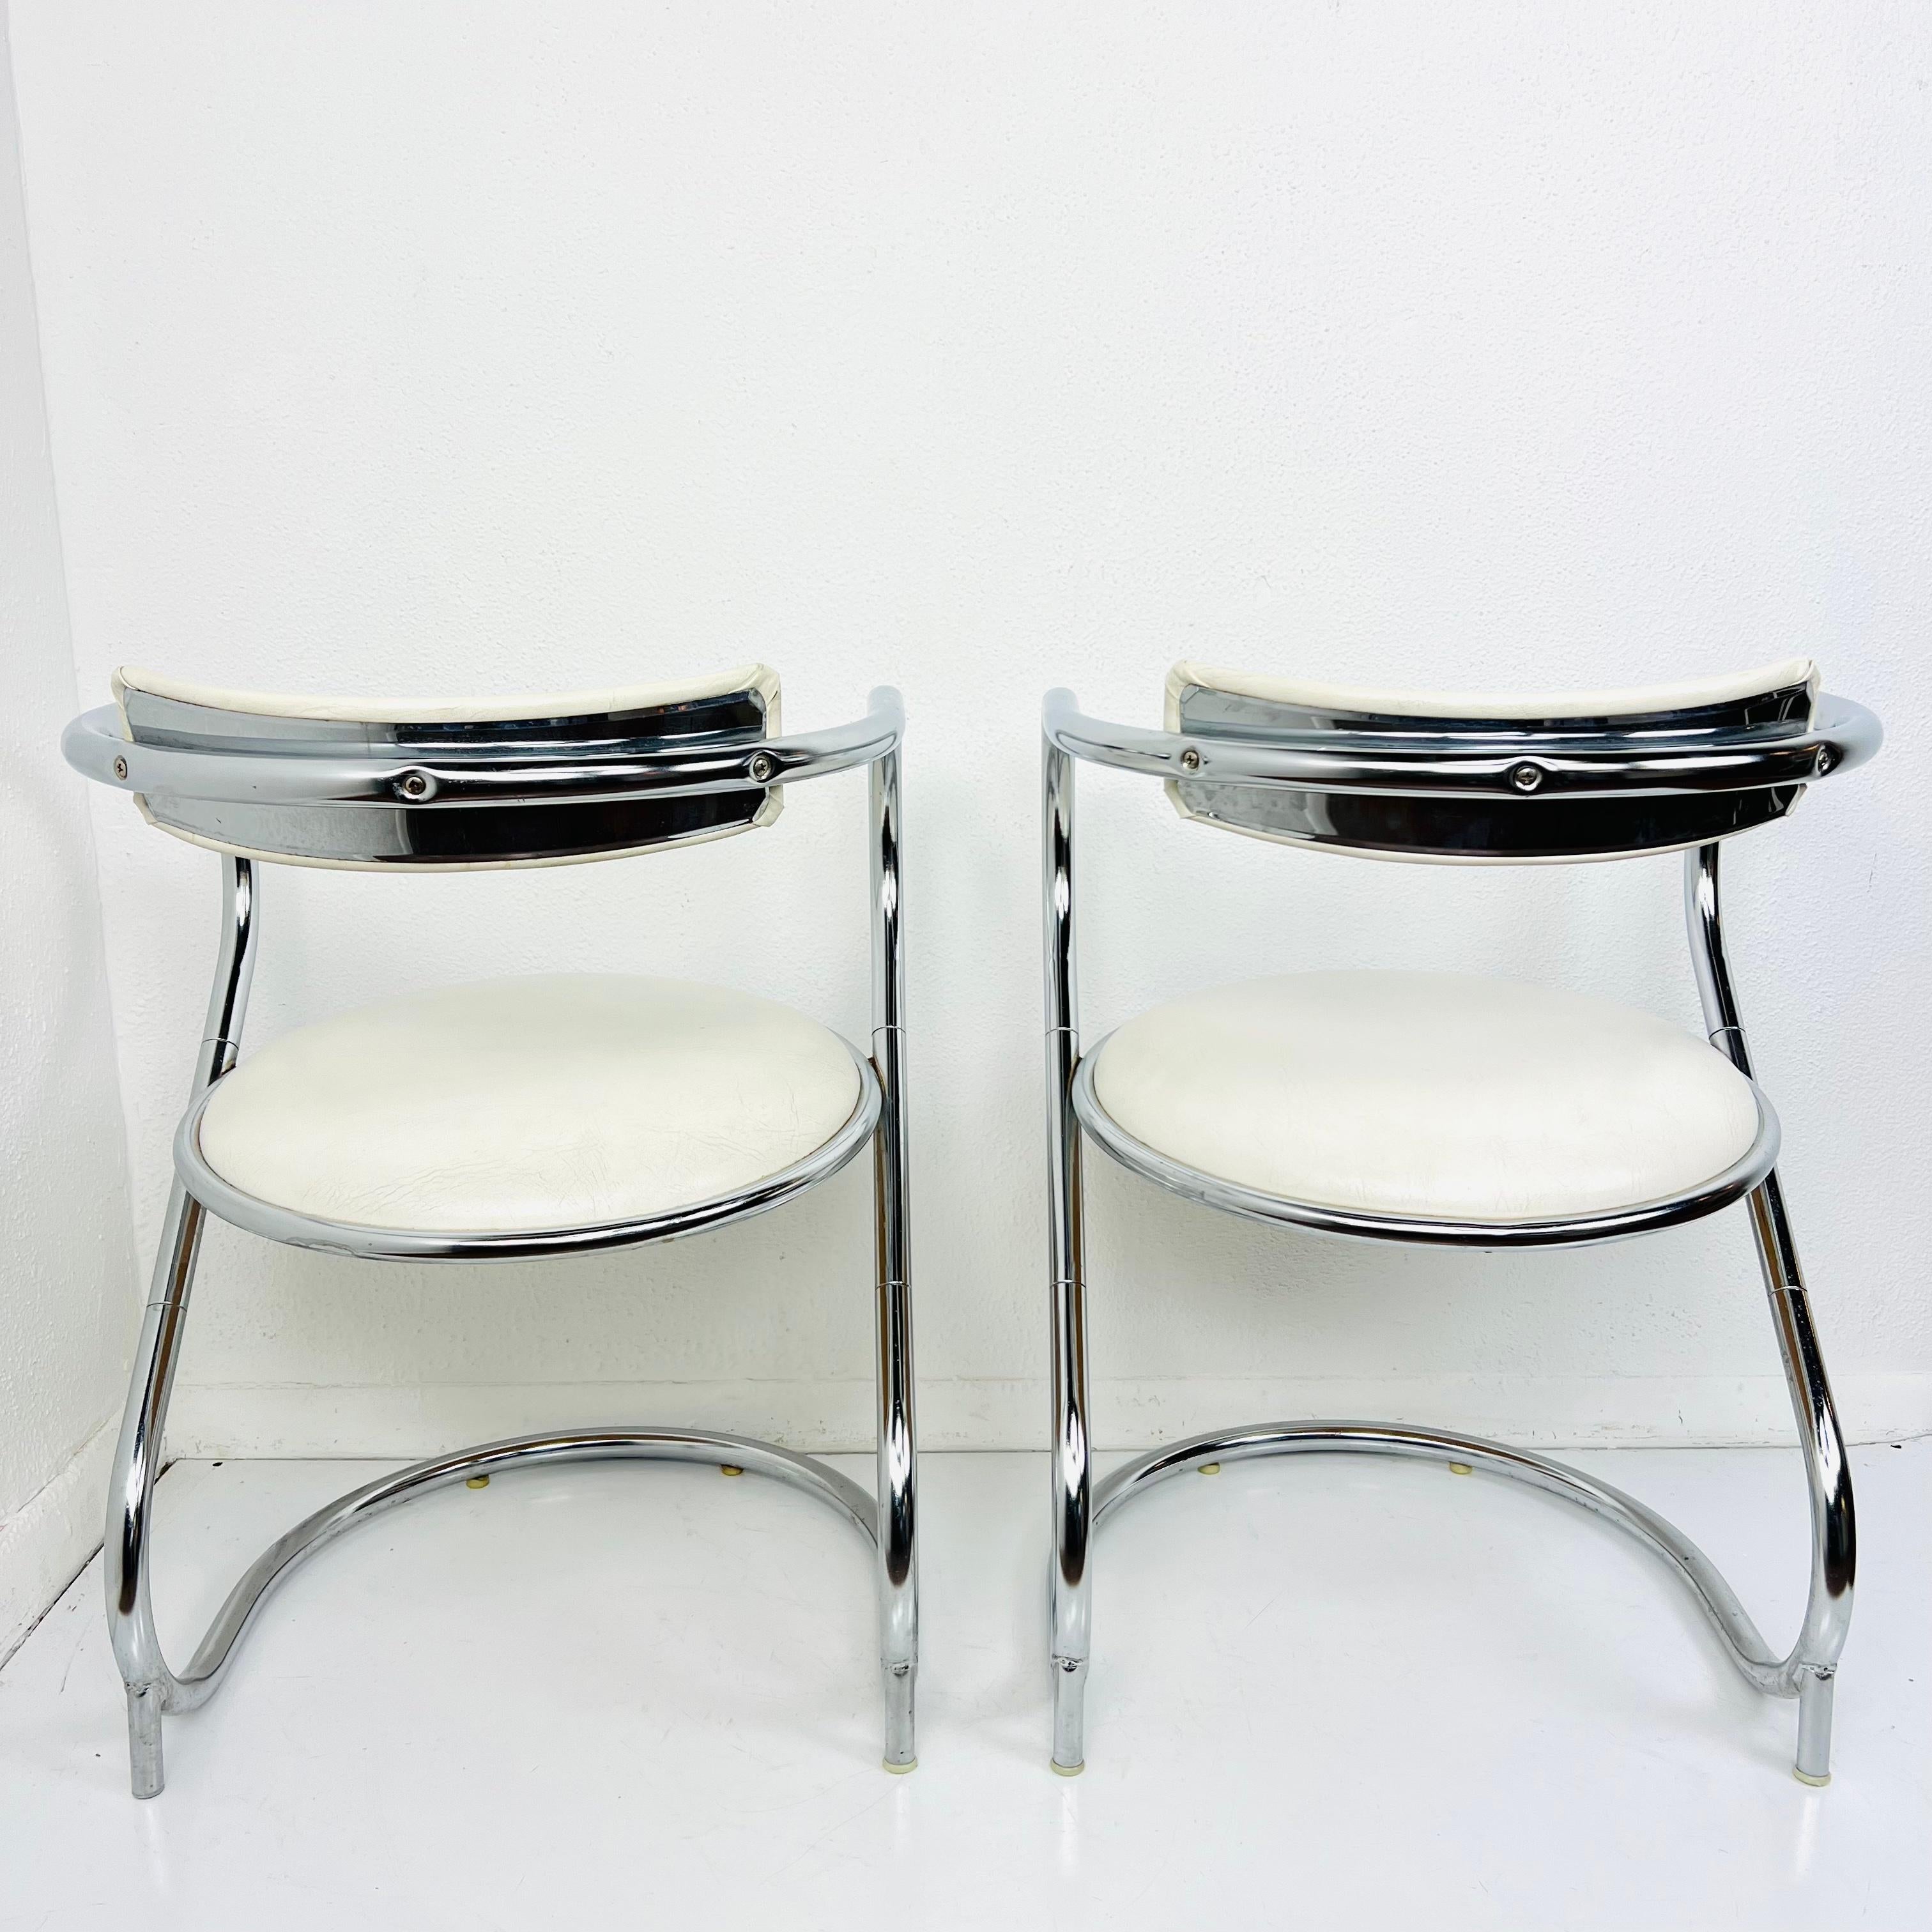 Pair of Midcentury Chrome Cantilever Chairs In Good Condition For Sale In Dallas, TX